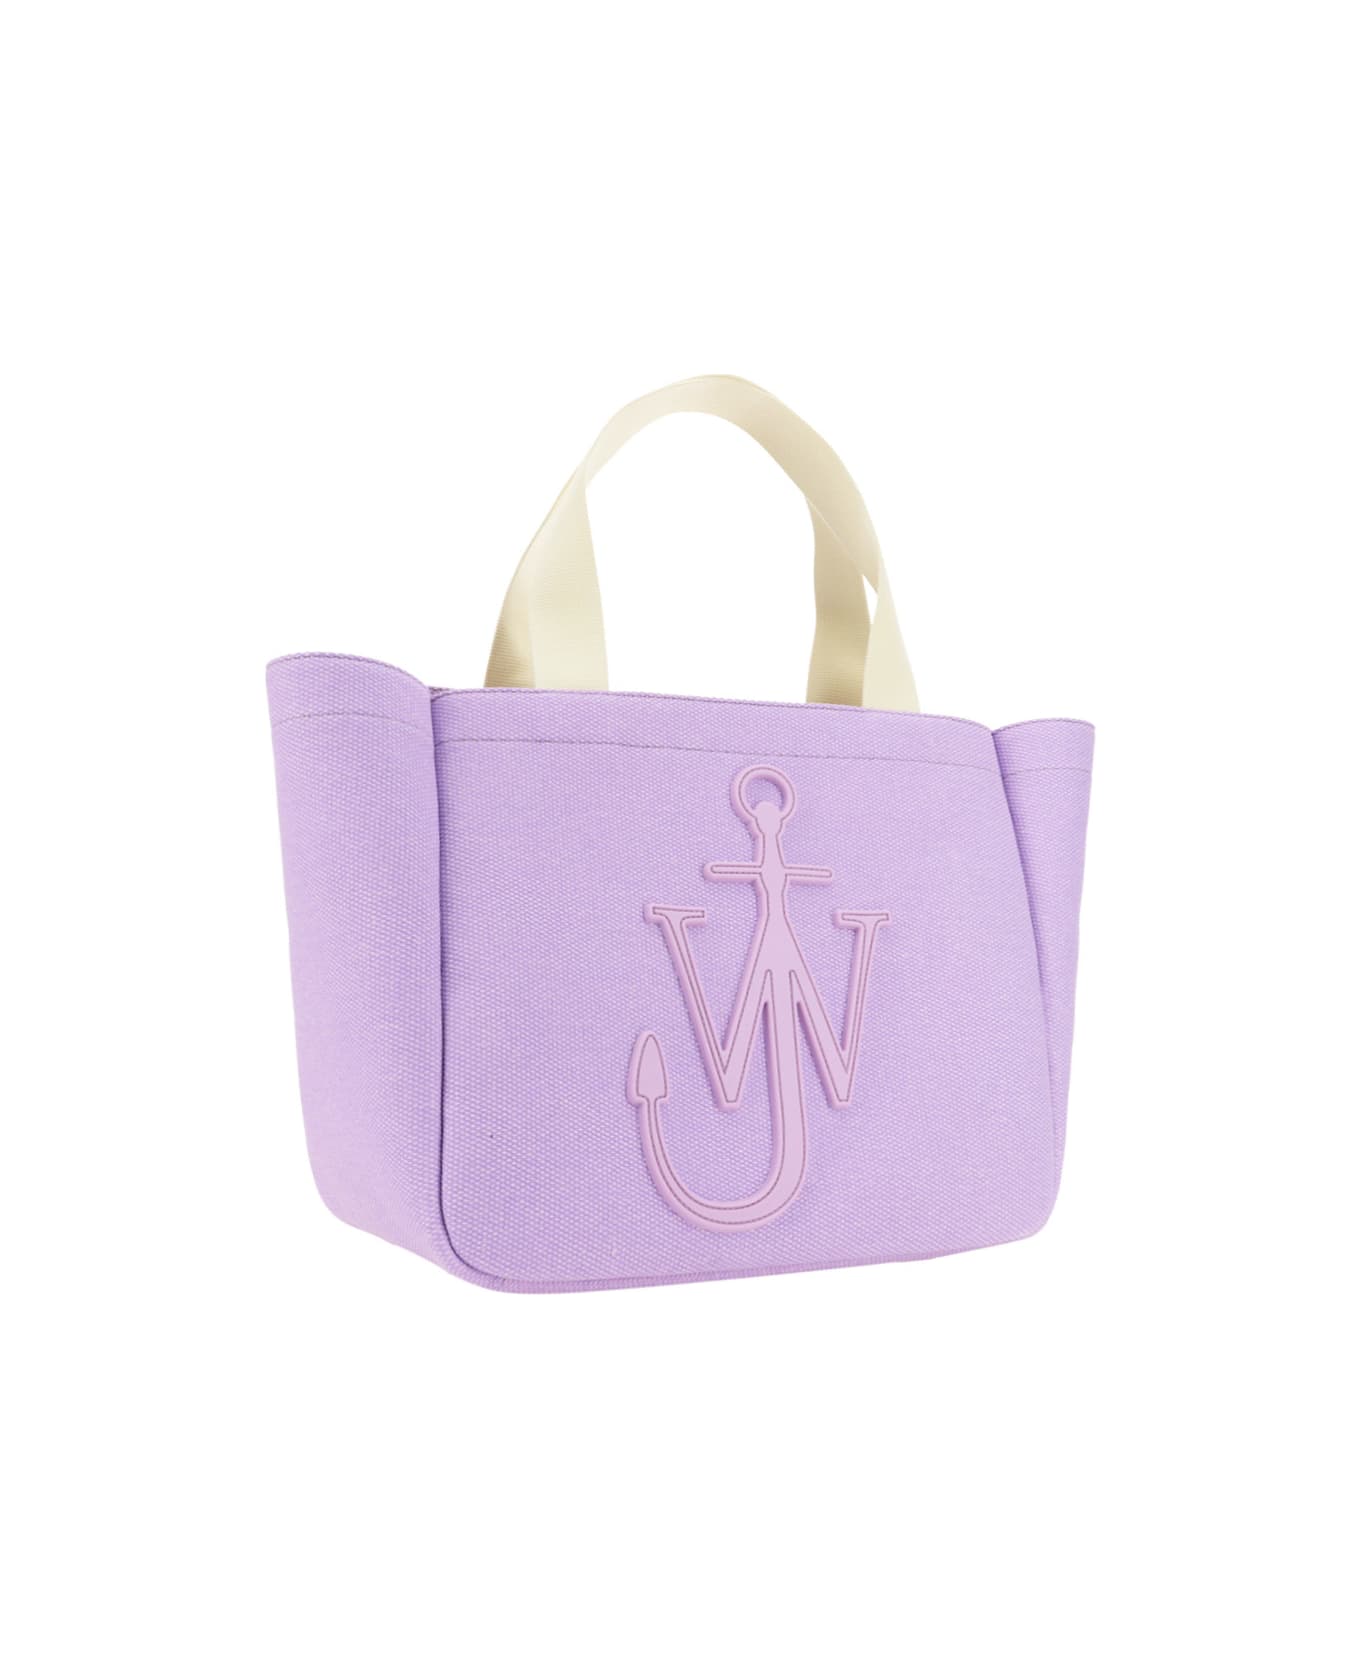 J.W. Anderson Cabas Tote Bag - Lilac トートバッグ